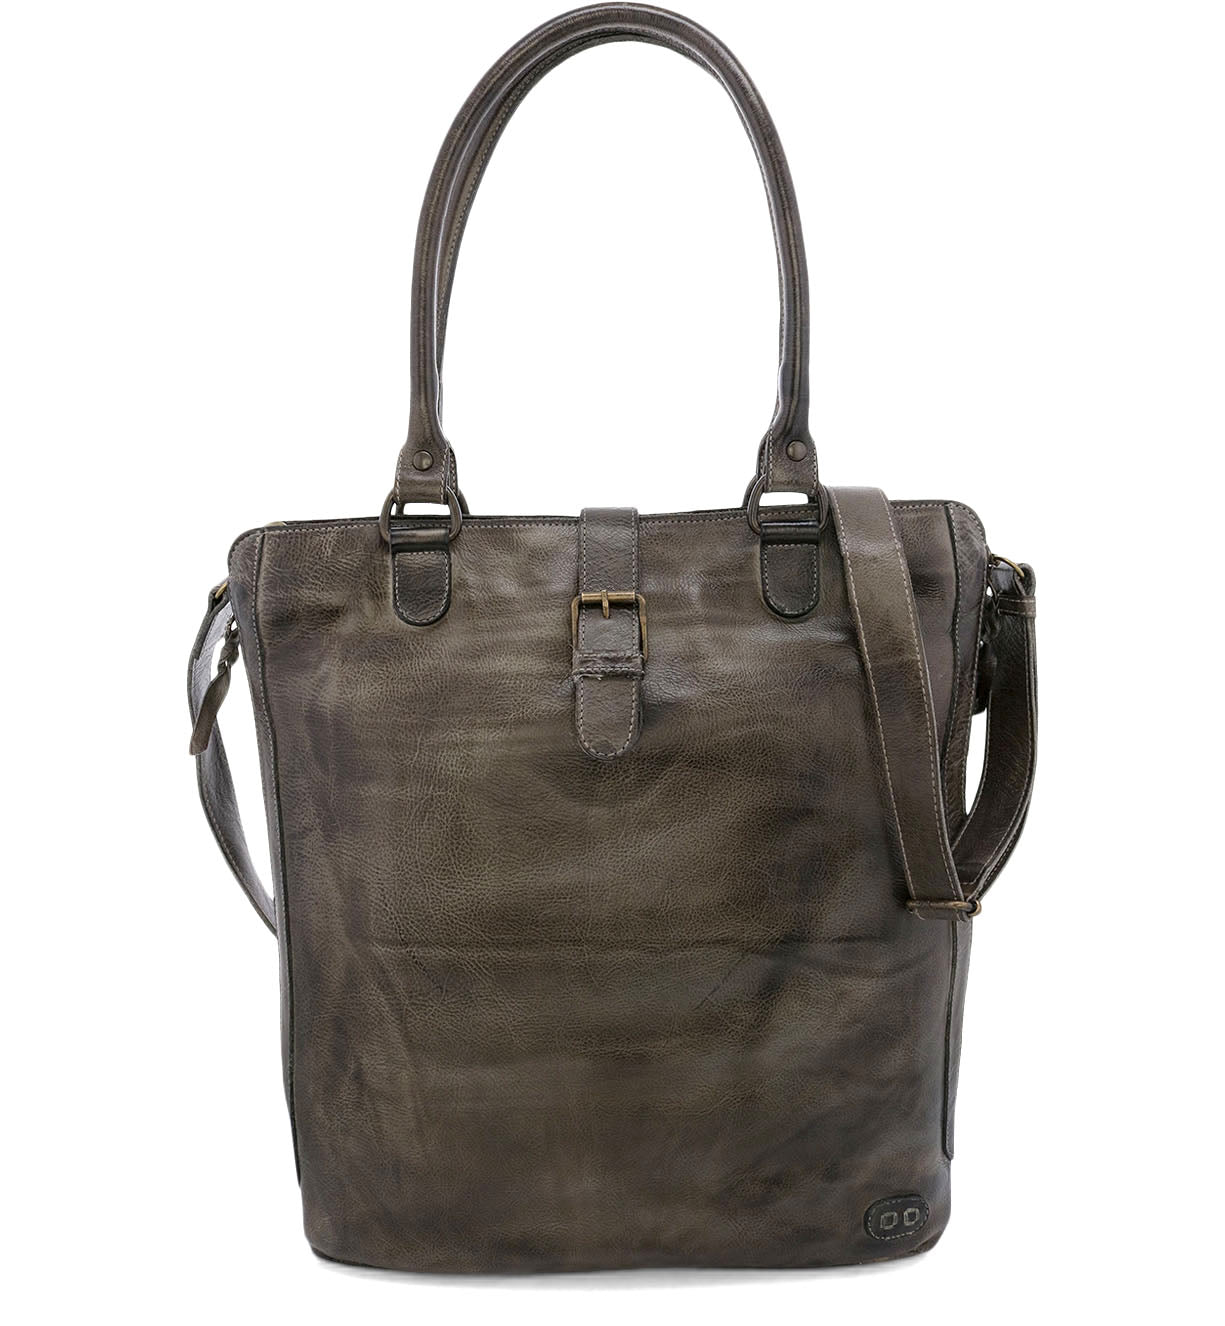 A grey leather Mildred tote bag by Bed Stu with two handles and a shoulder strap.